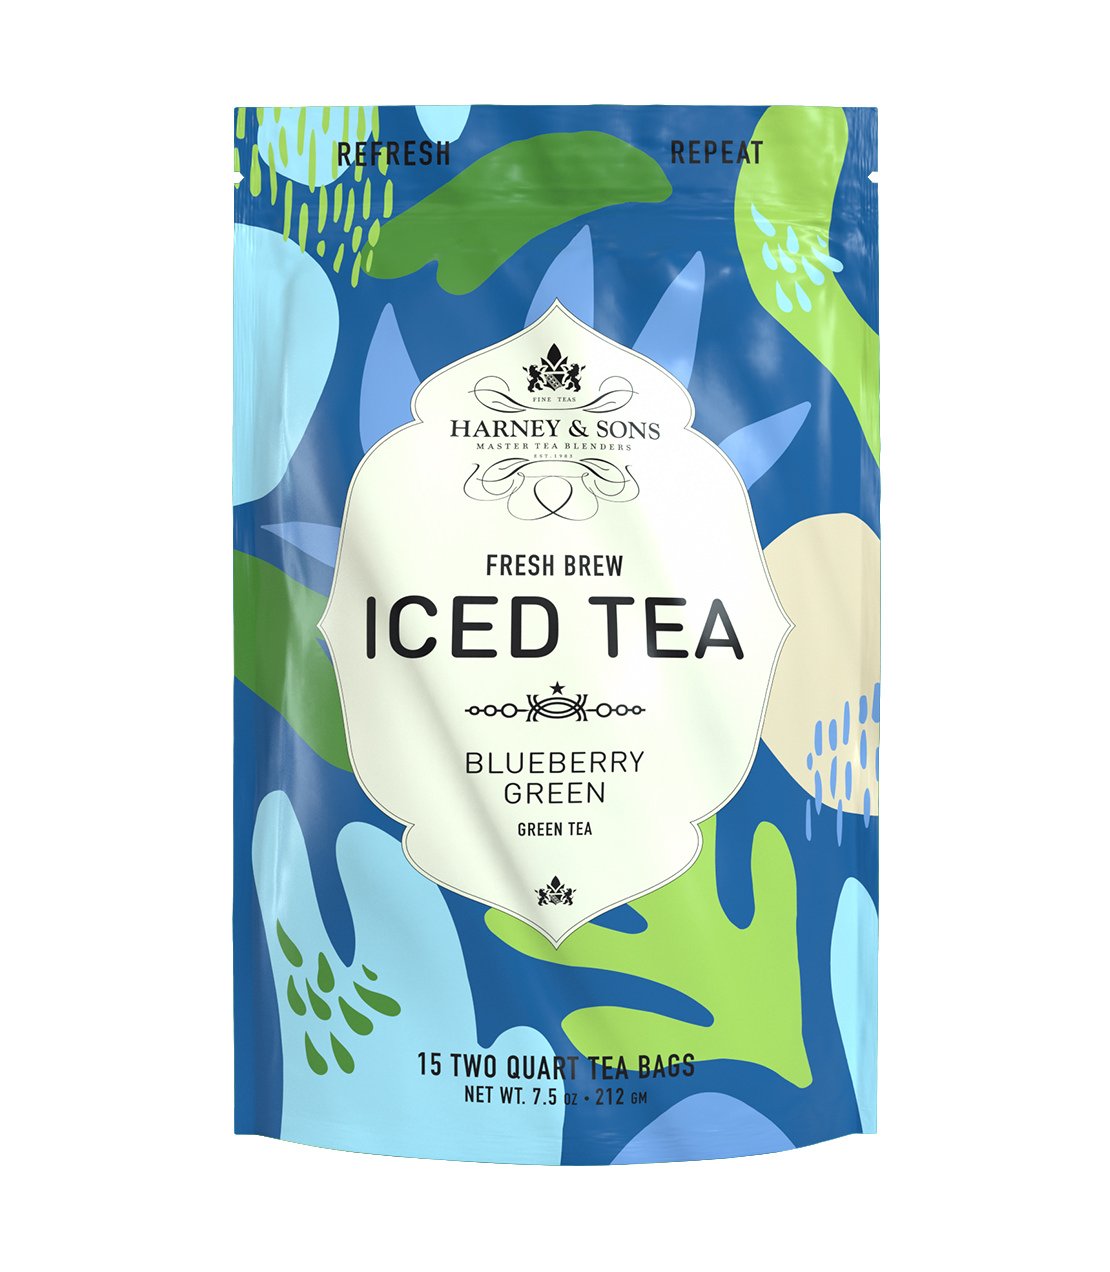 Blueberry Green Fresh Brew Iced Tea - Iced Tea Pouches Bag of 15 Pouches - Harney & Sons Fine Teas Europe